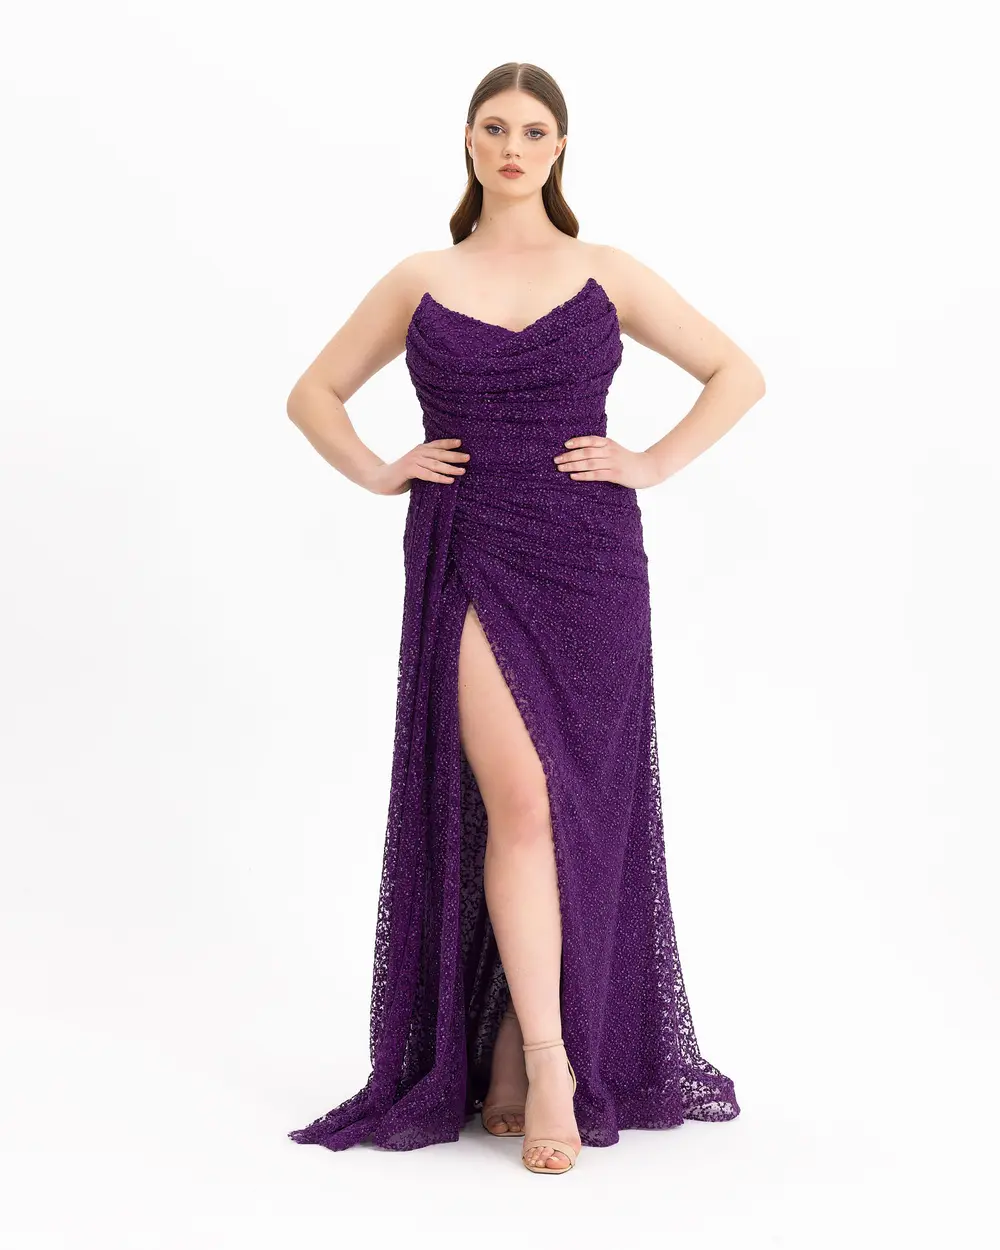  PLUS SIZE STRAPLES DRAPED BRODE EVENING DRESS